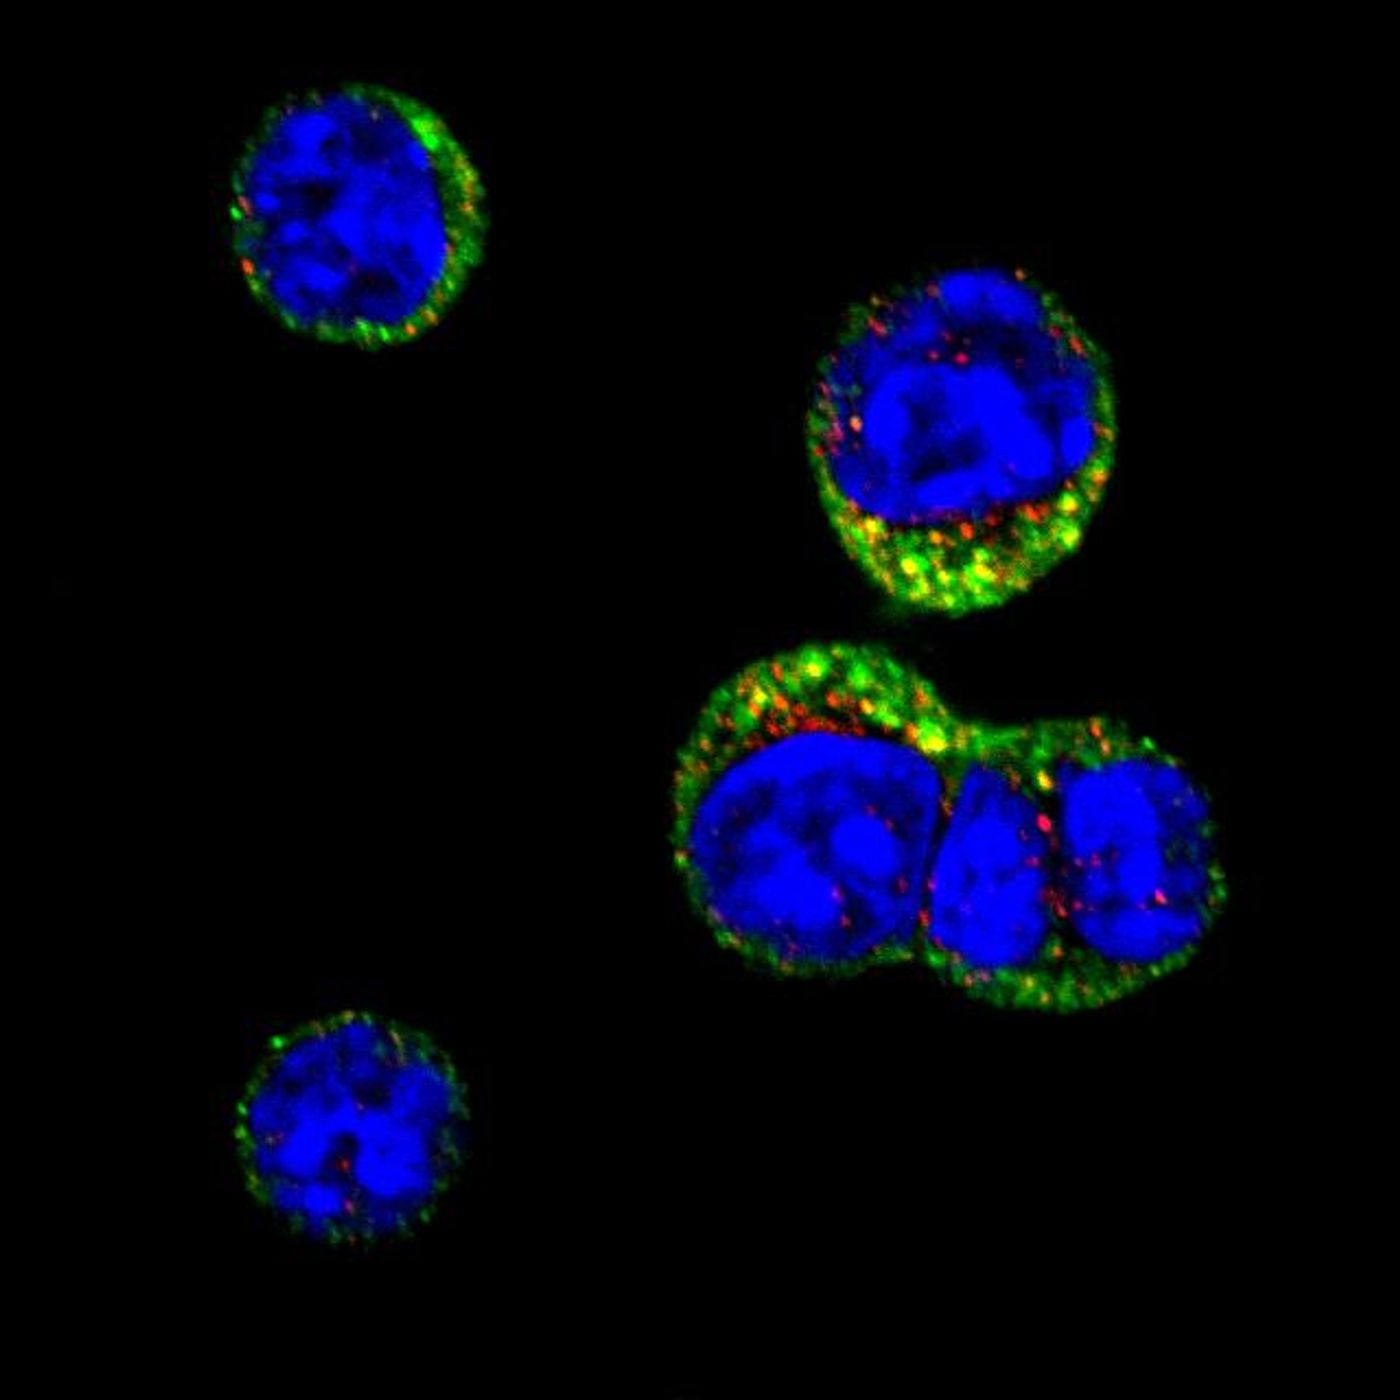 This is a microscopy image showing collections of mRNA molecules, called RNA granules (green), inside B cells that are altering their genes to produce antibodies. DNA is shown in blue. Credit: Dr Manuel Díaz-Muñoz